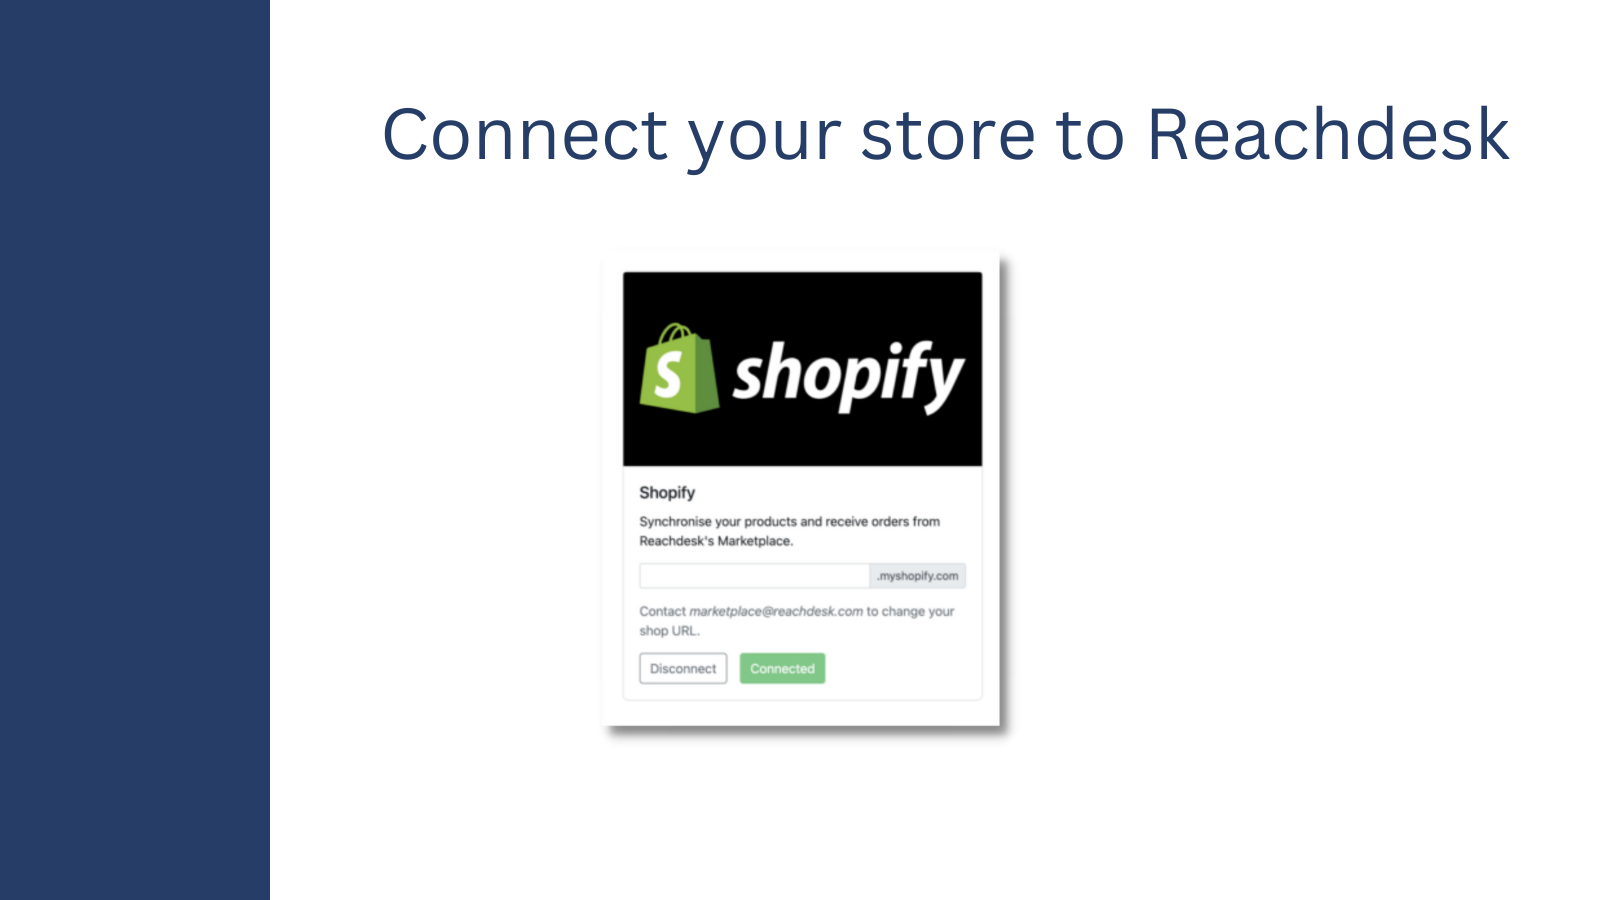 Connect your store to Reachdesk